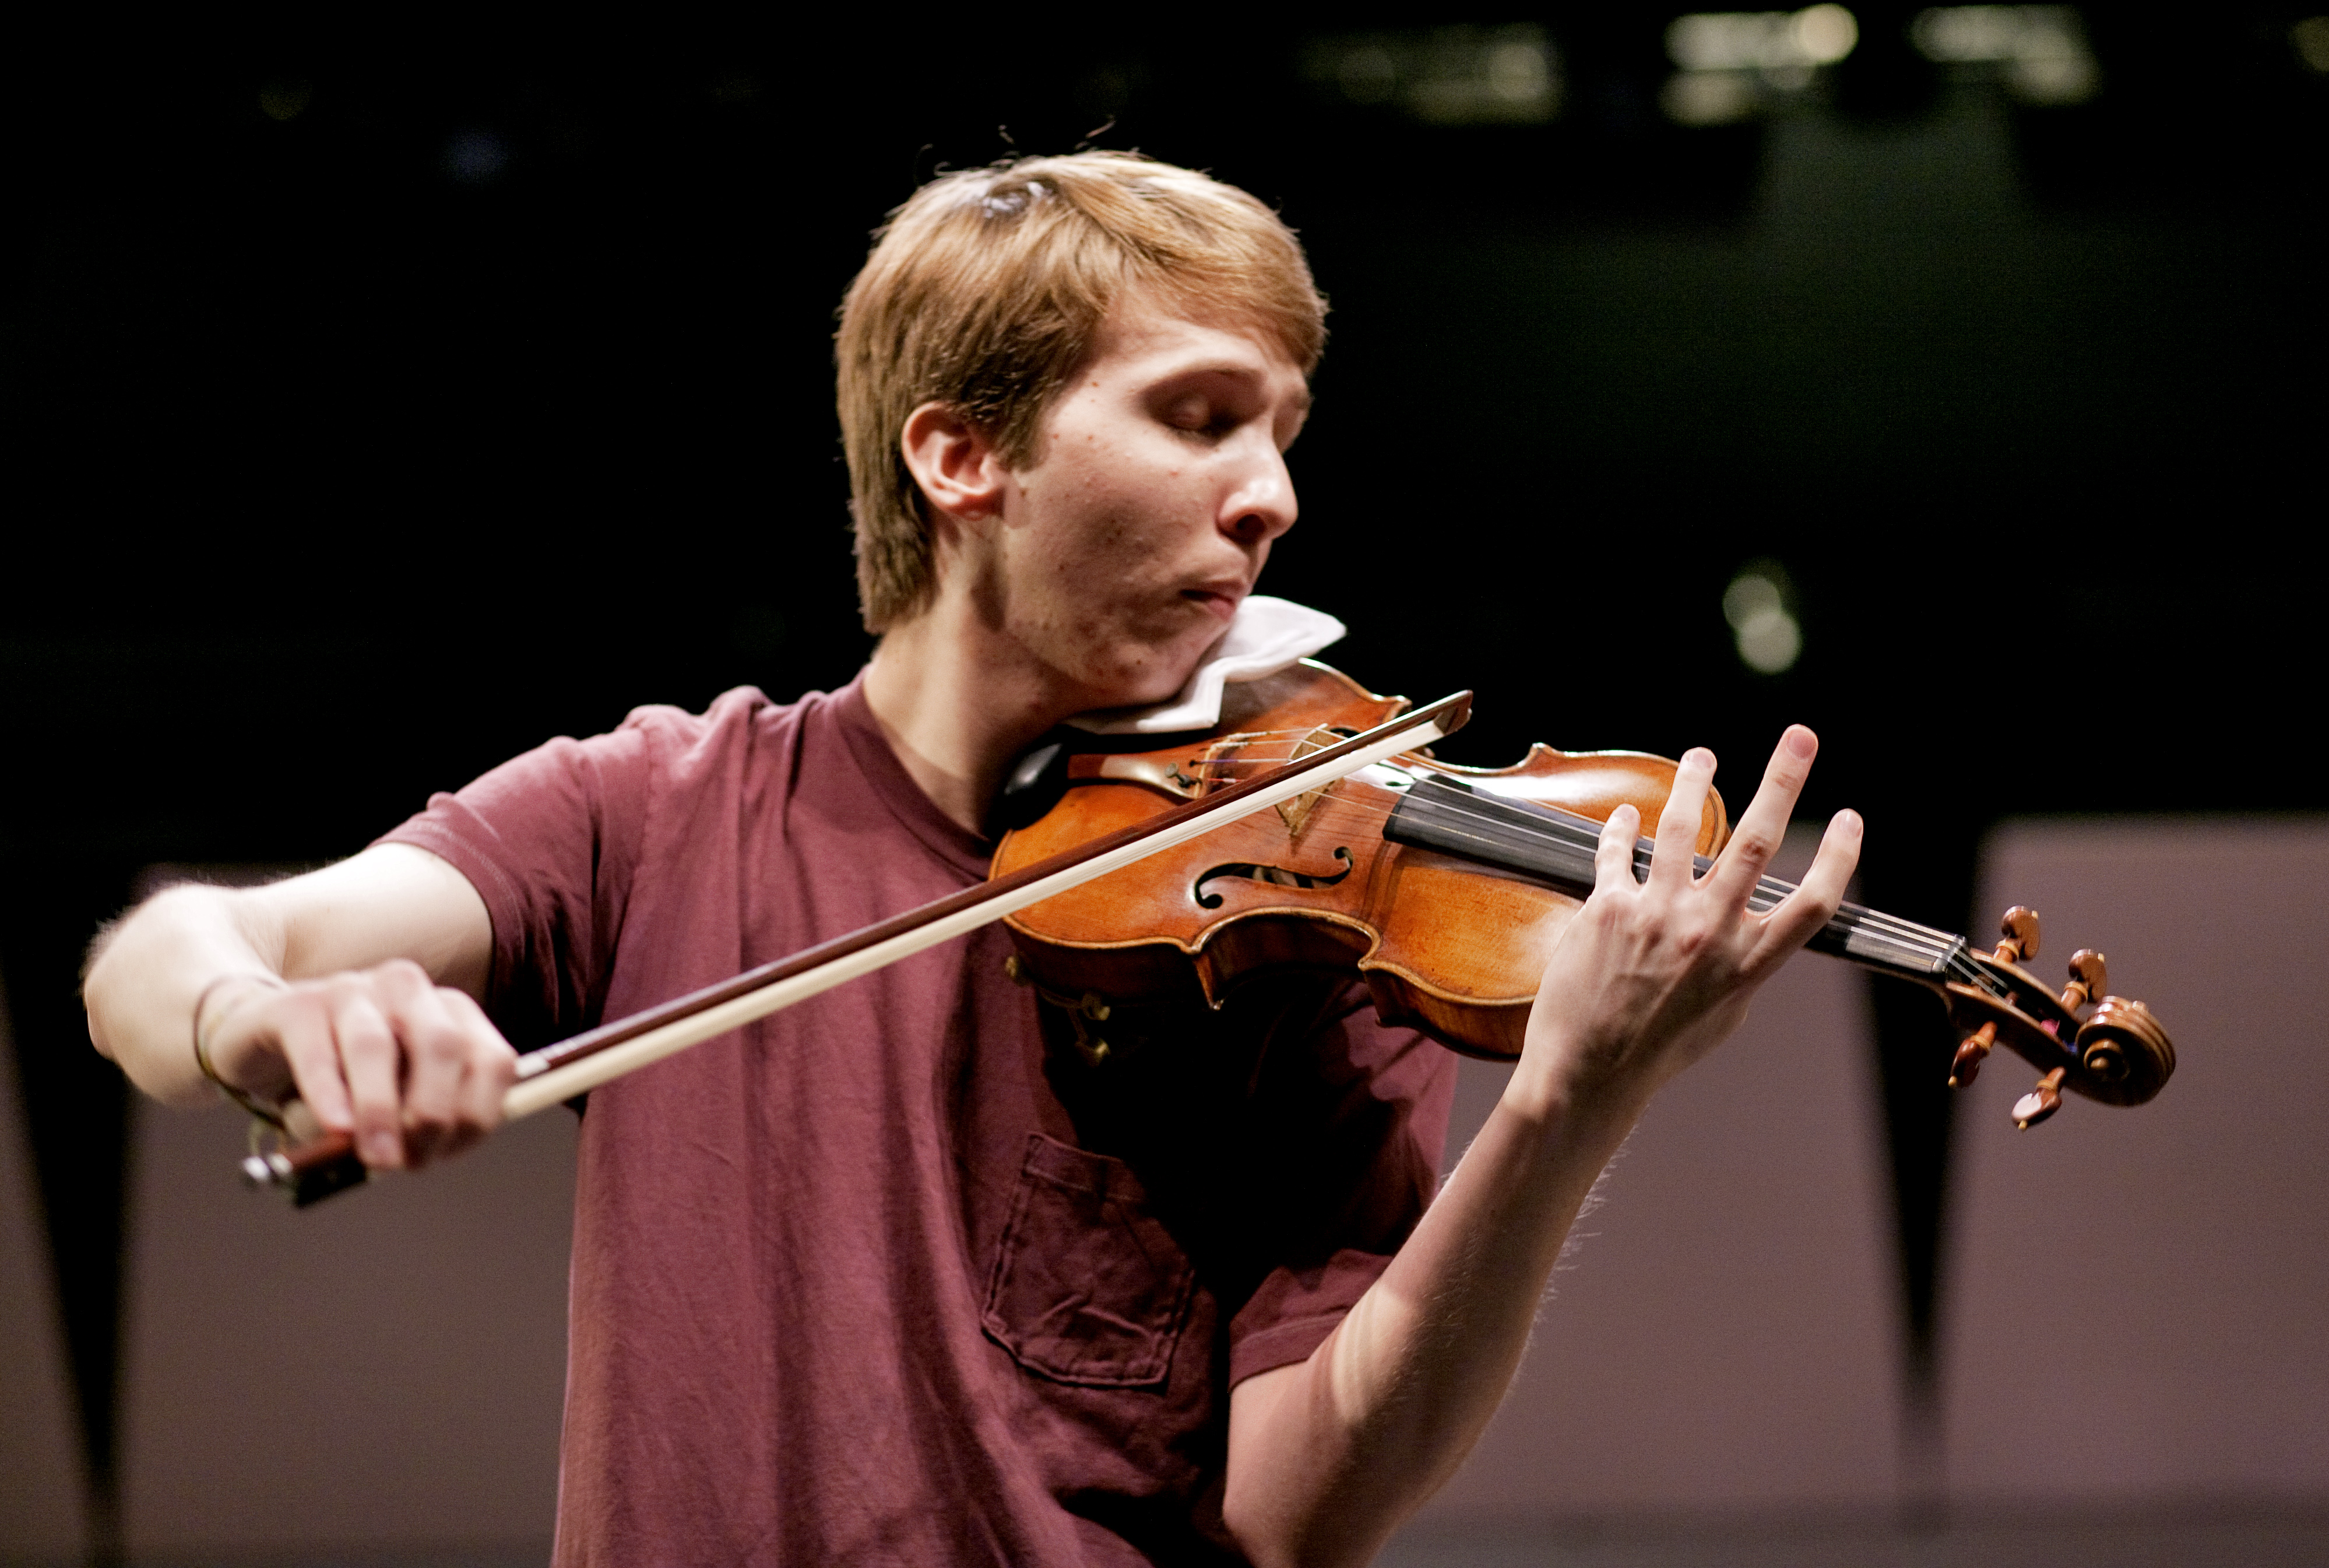 følsomhed Venlighed kulstof UCLA's own Stradivarius violin reverberates with history - Daily Bruin